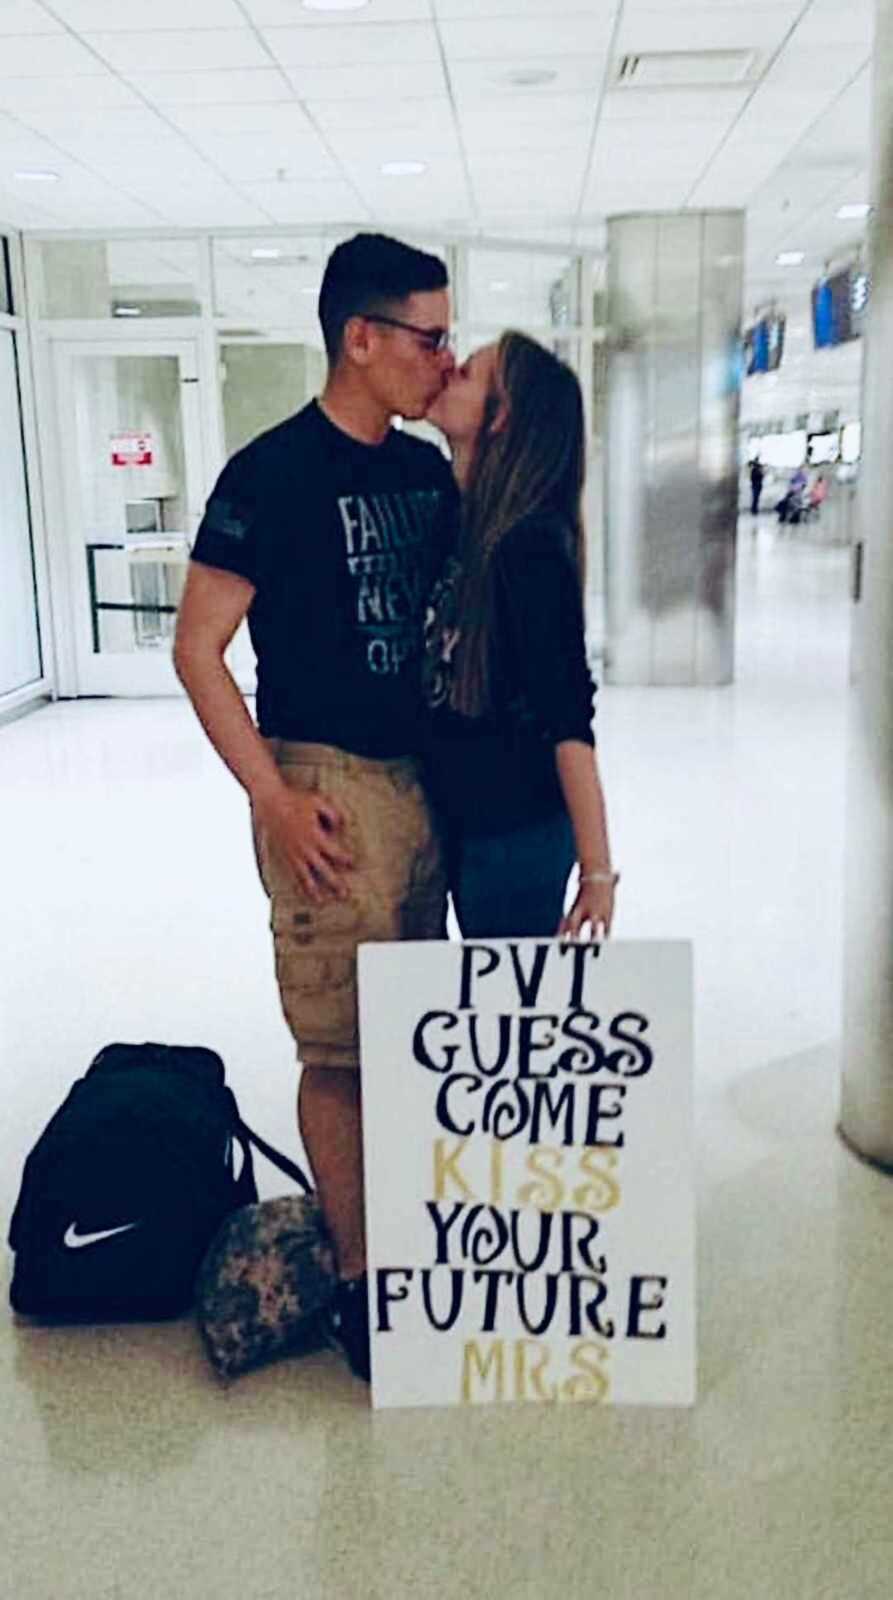 woman kisses army fiance in airport holding sign saying "pvt Guess come kiss your future Mrs."